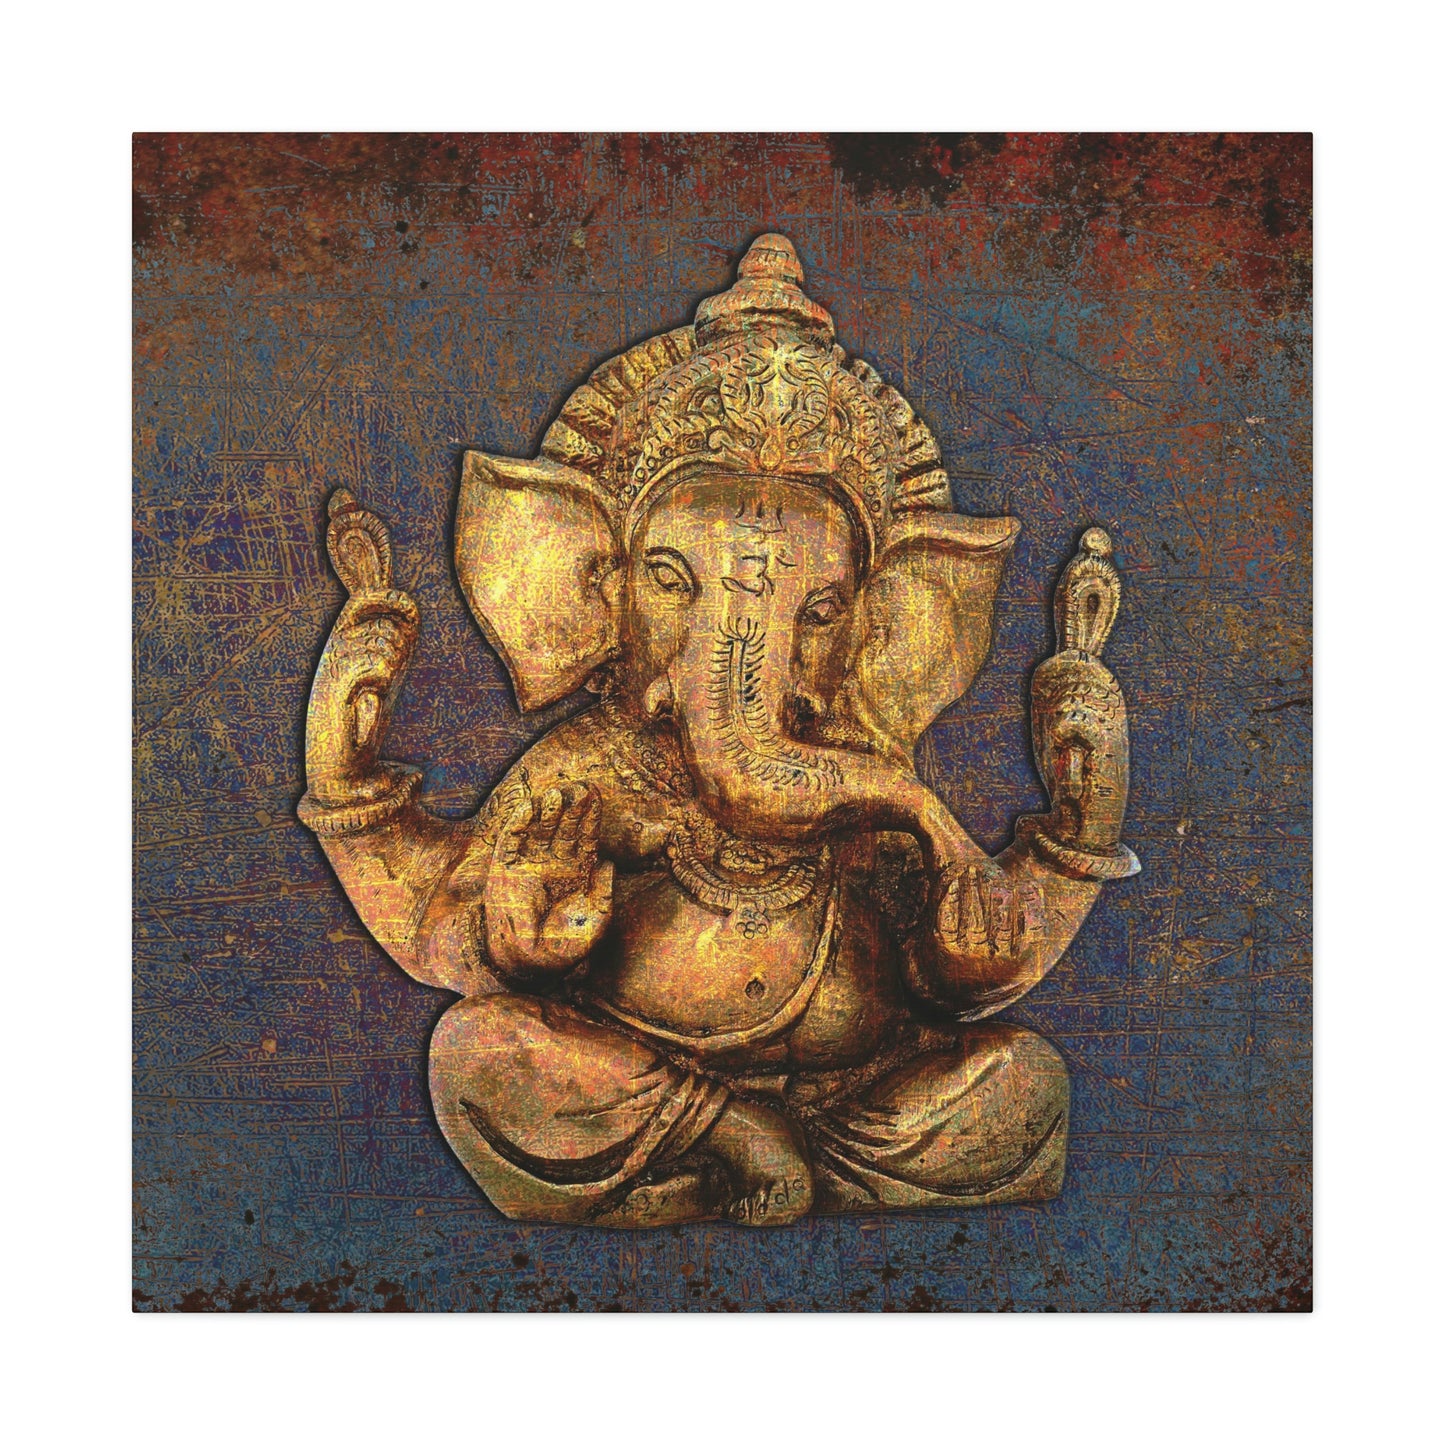 Hinduism Themed Wall Art - Ganesha on a Distressed Purple and Orange Background Printed on Unframed Stretched Canvas